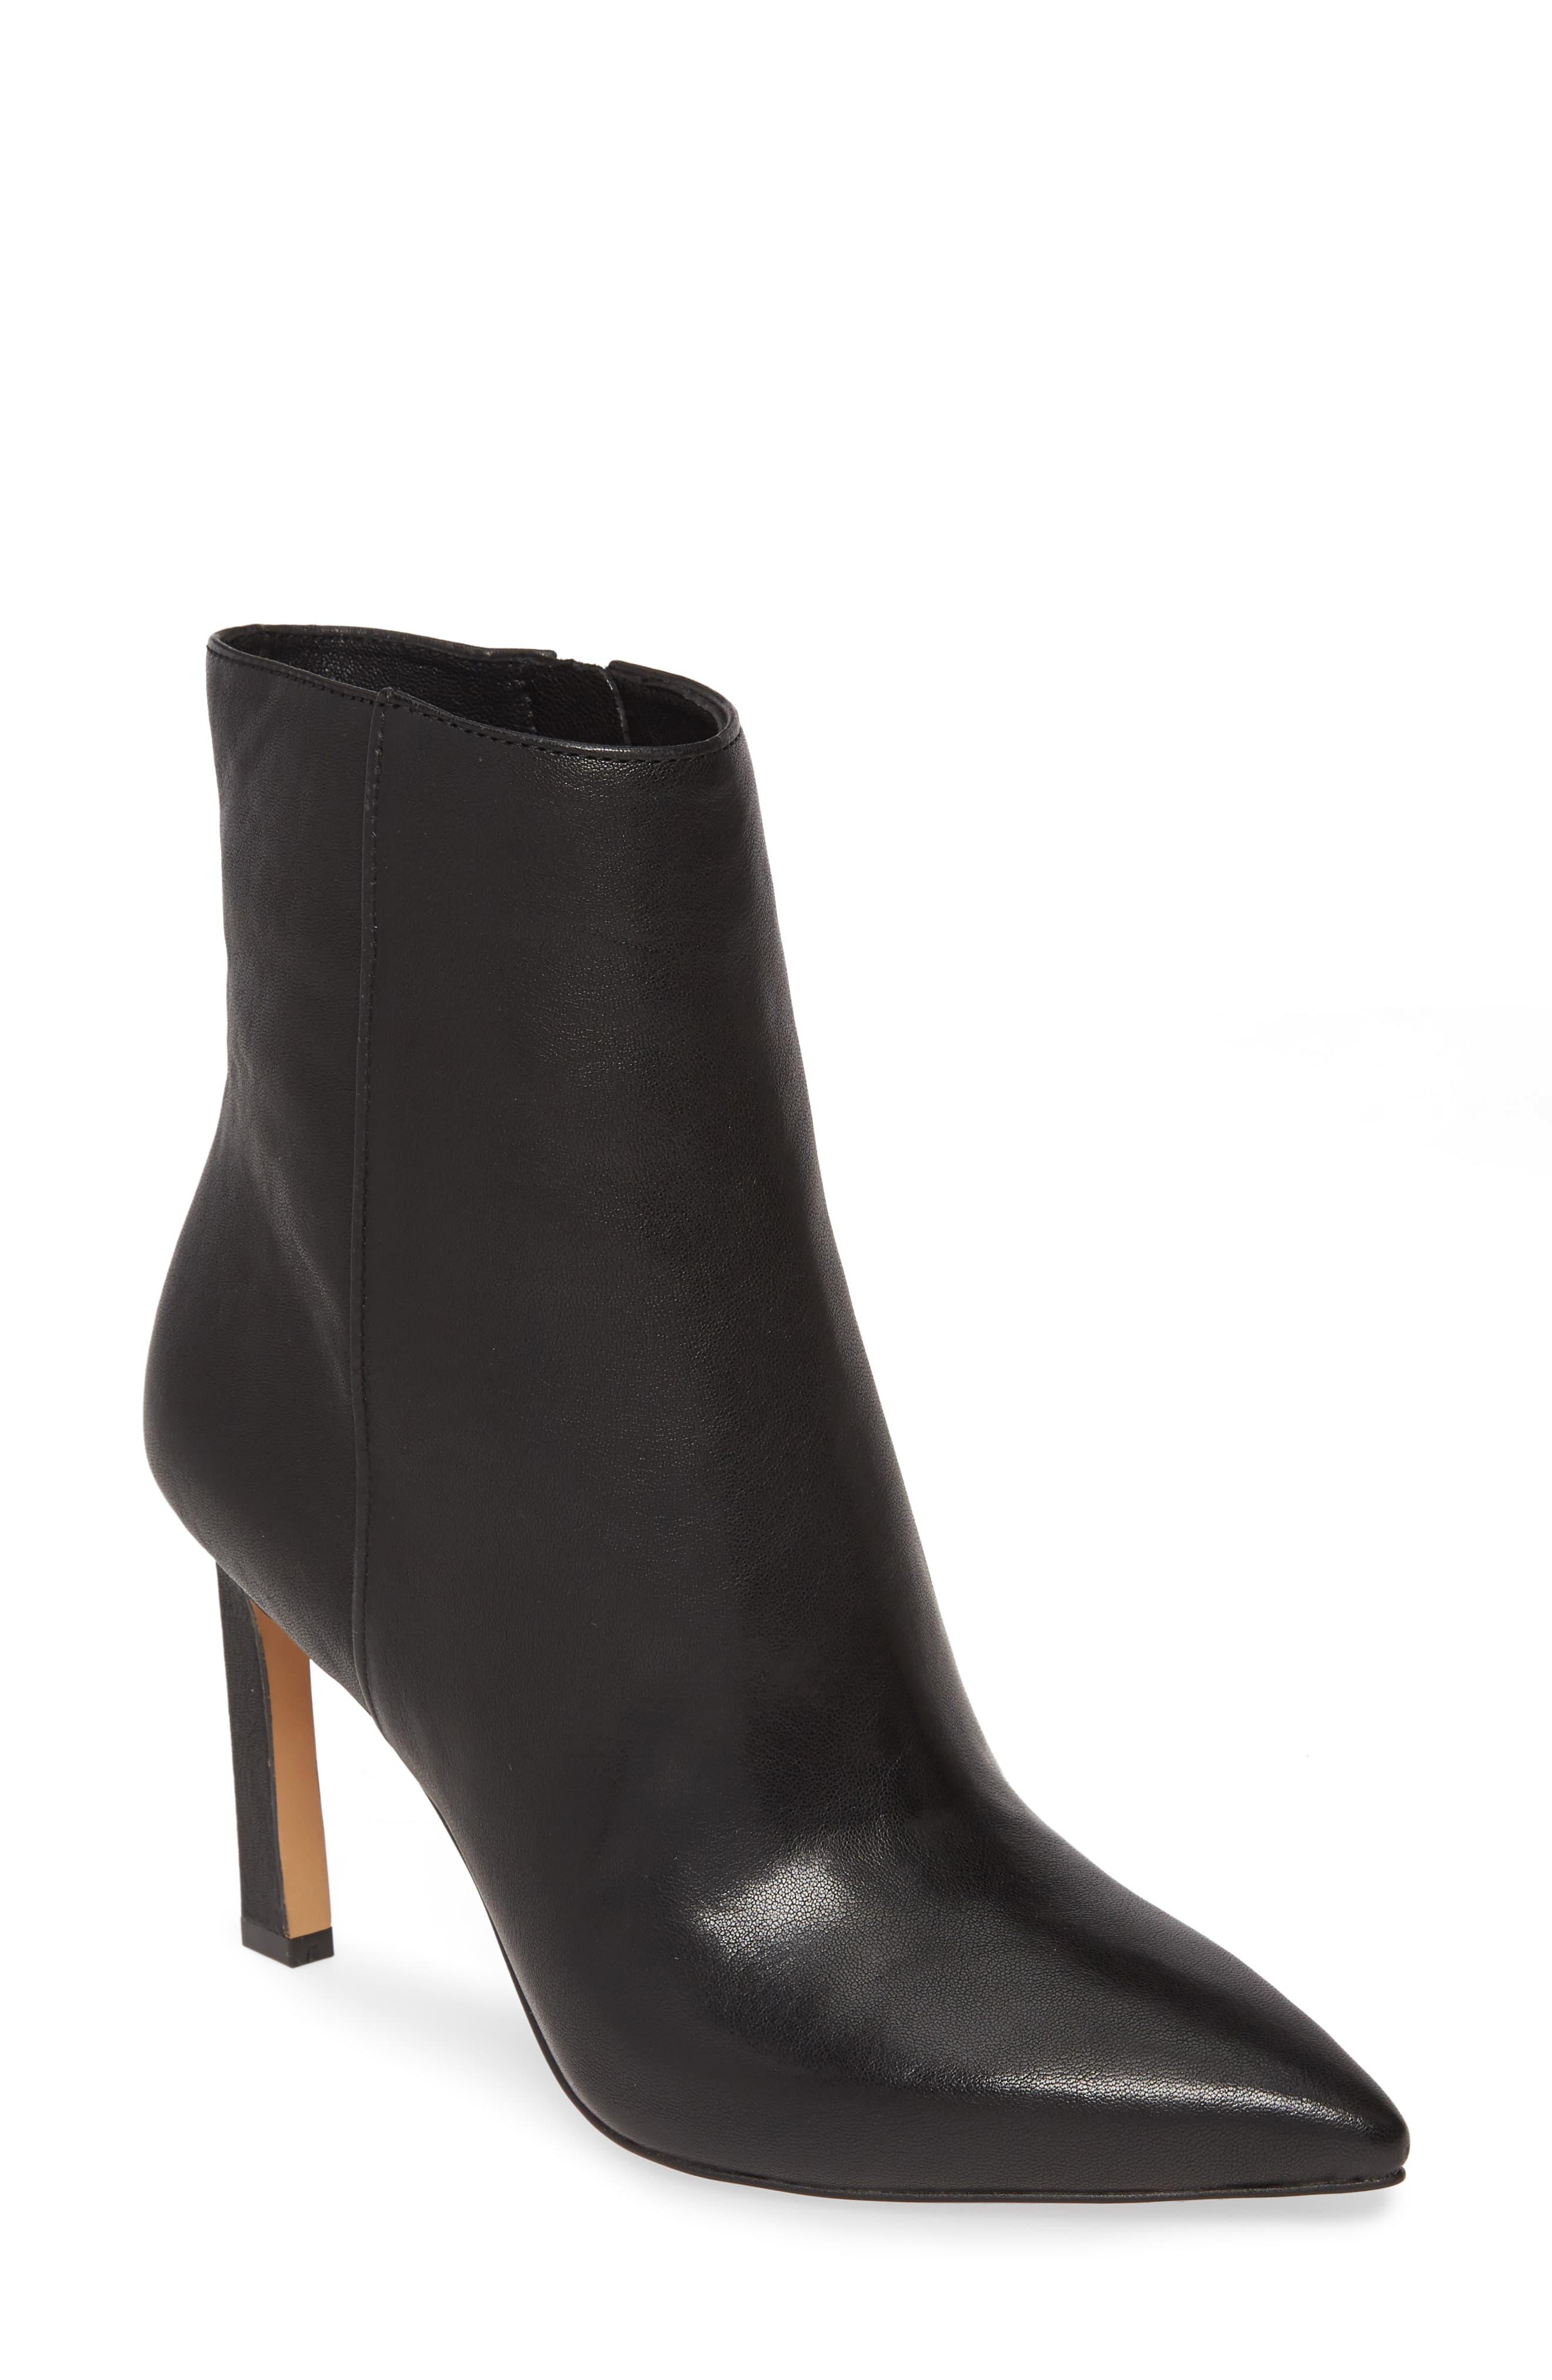 vince camuto black booties